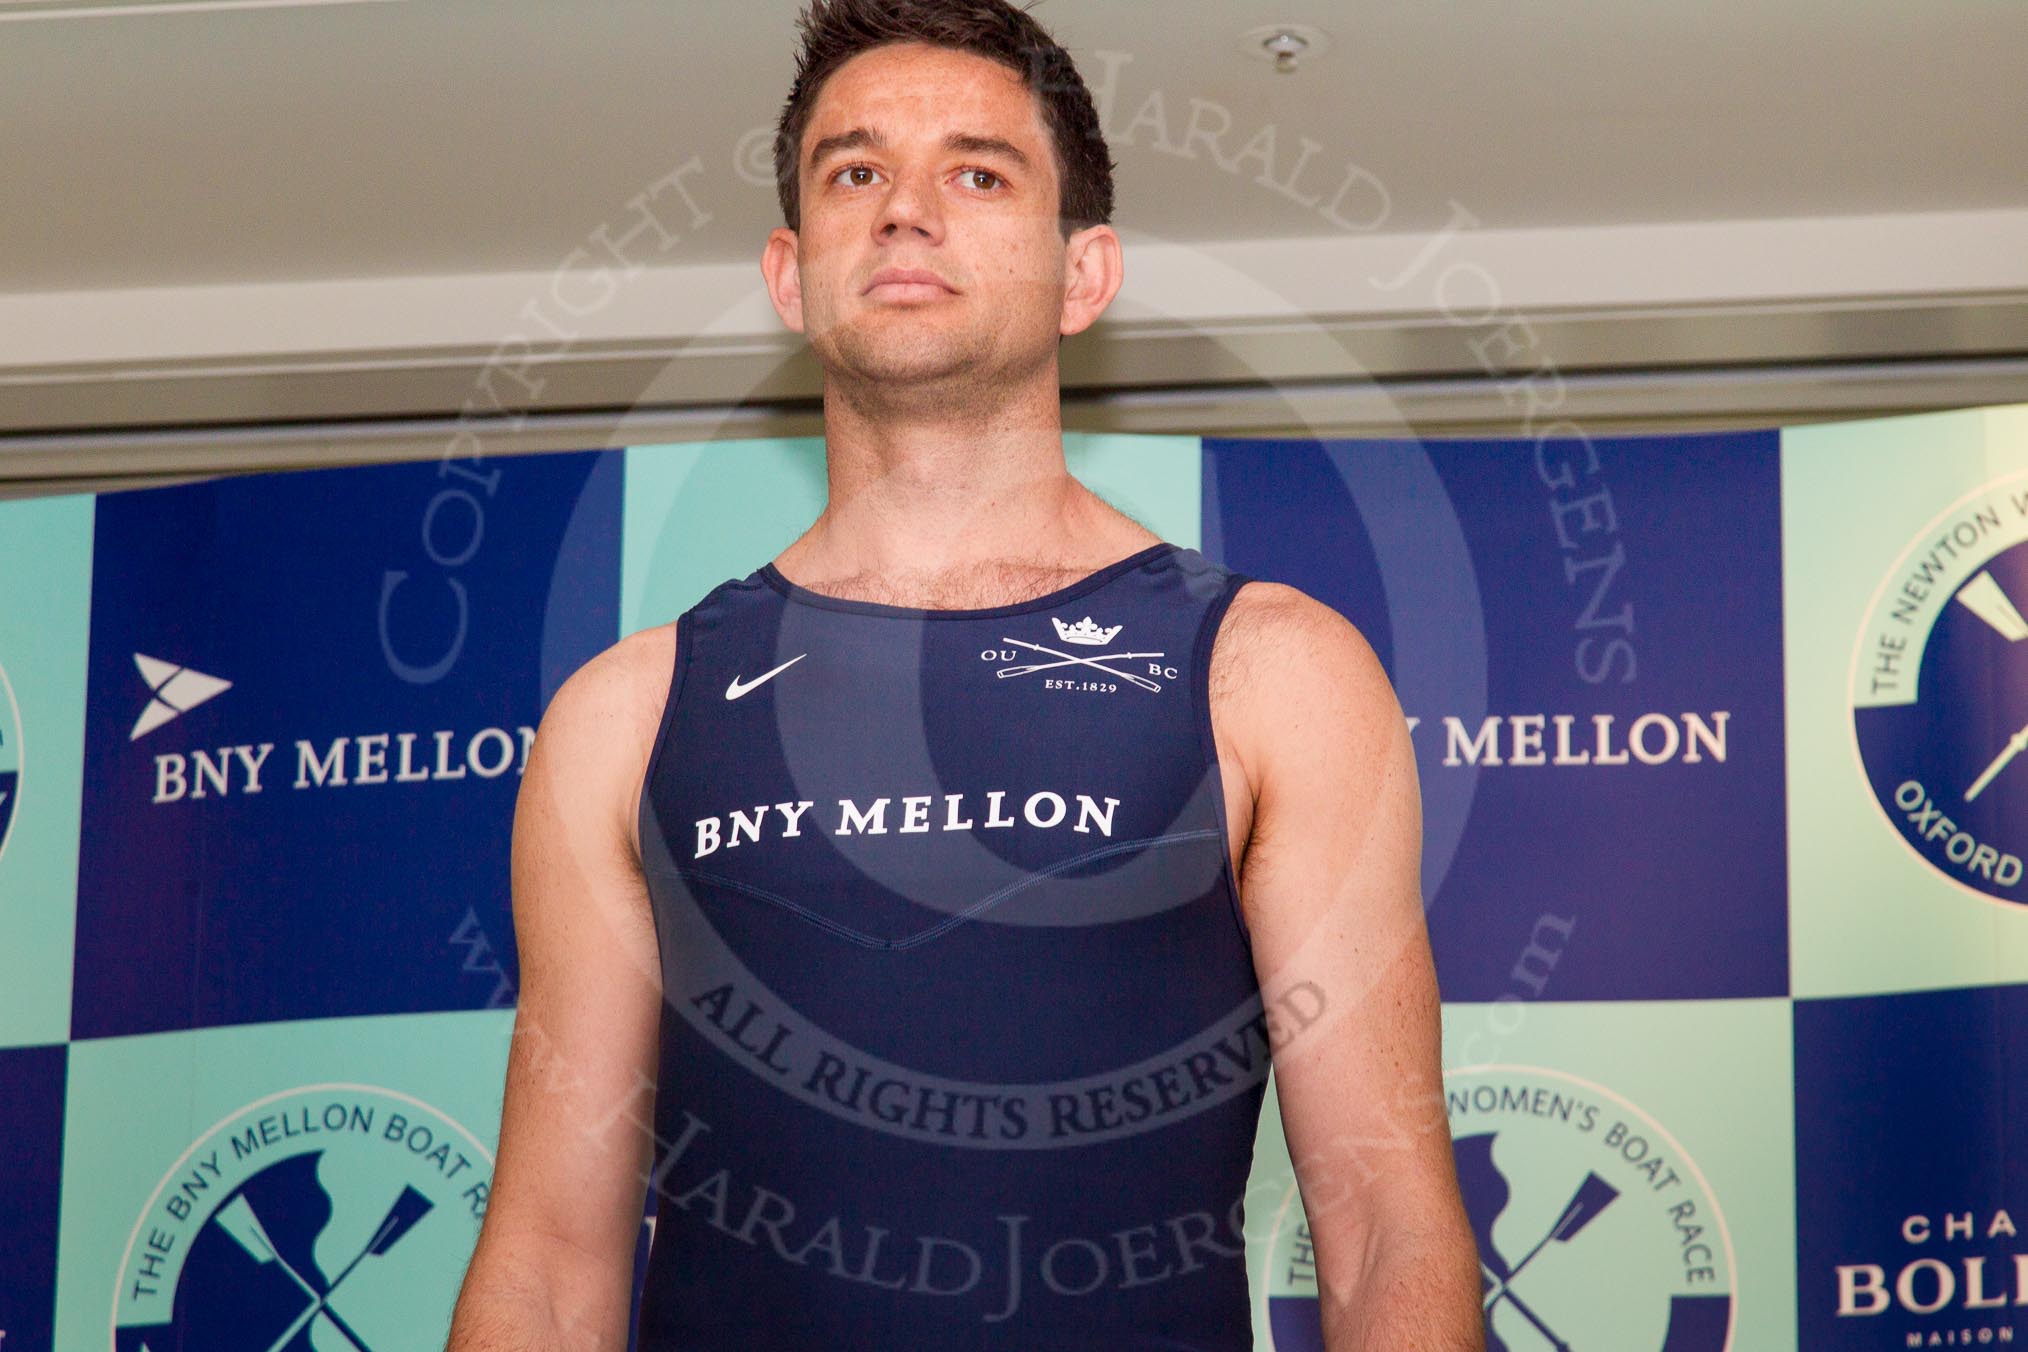 The Boat Race season 2014 - Crew Announcement and Weigh In: The 2014 Boat Race crews, Oxford bow Storm Uru - 80.4kg..
BNY Mellon Centre,
London EC4V 4LA,
London,
United Kingdom,
on 10 March 2014 at 11:57, image #75